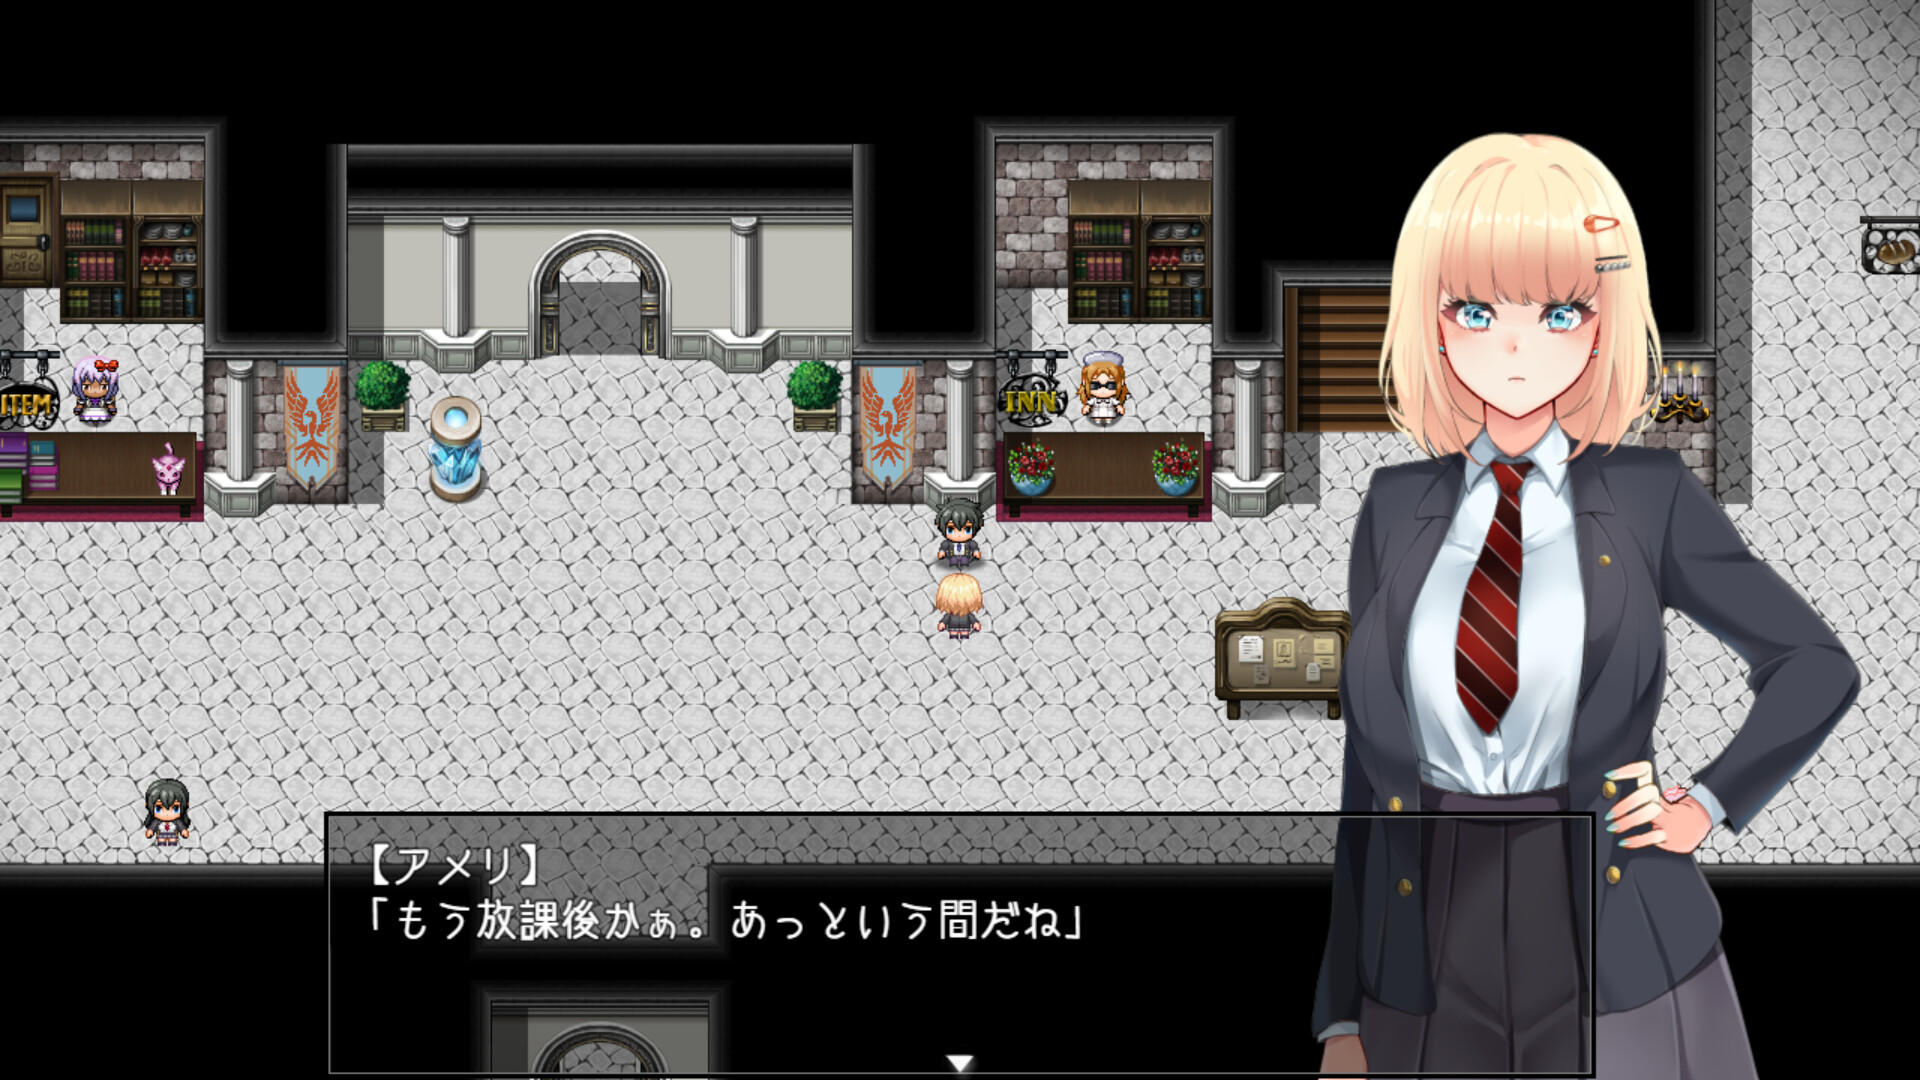 Amelie falls over and over again ~ An endless week in Magic Academy screenshot game